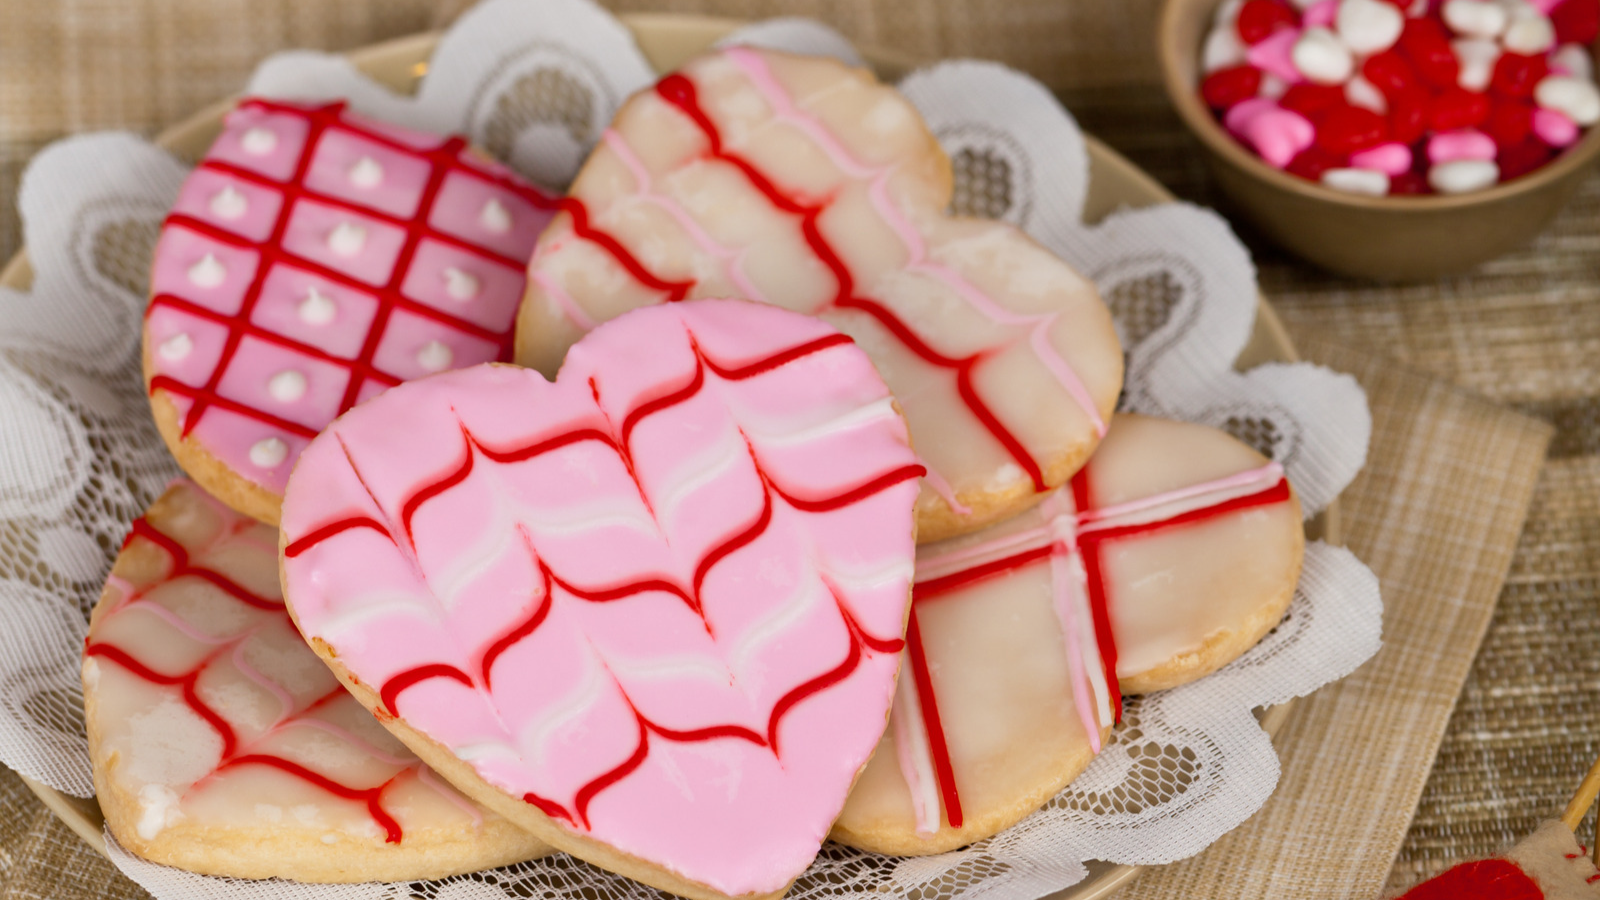 Five heart shaped cookies decorated with pink, white and red frosting on top of doily and plate with heart shaped mini candies in brown bowl behind